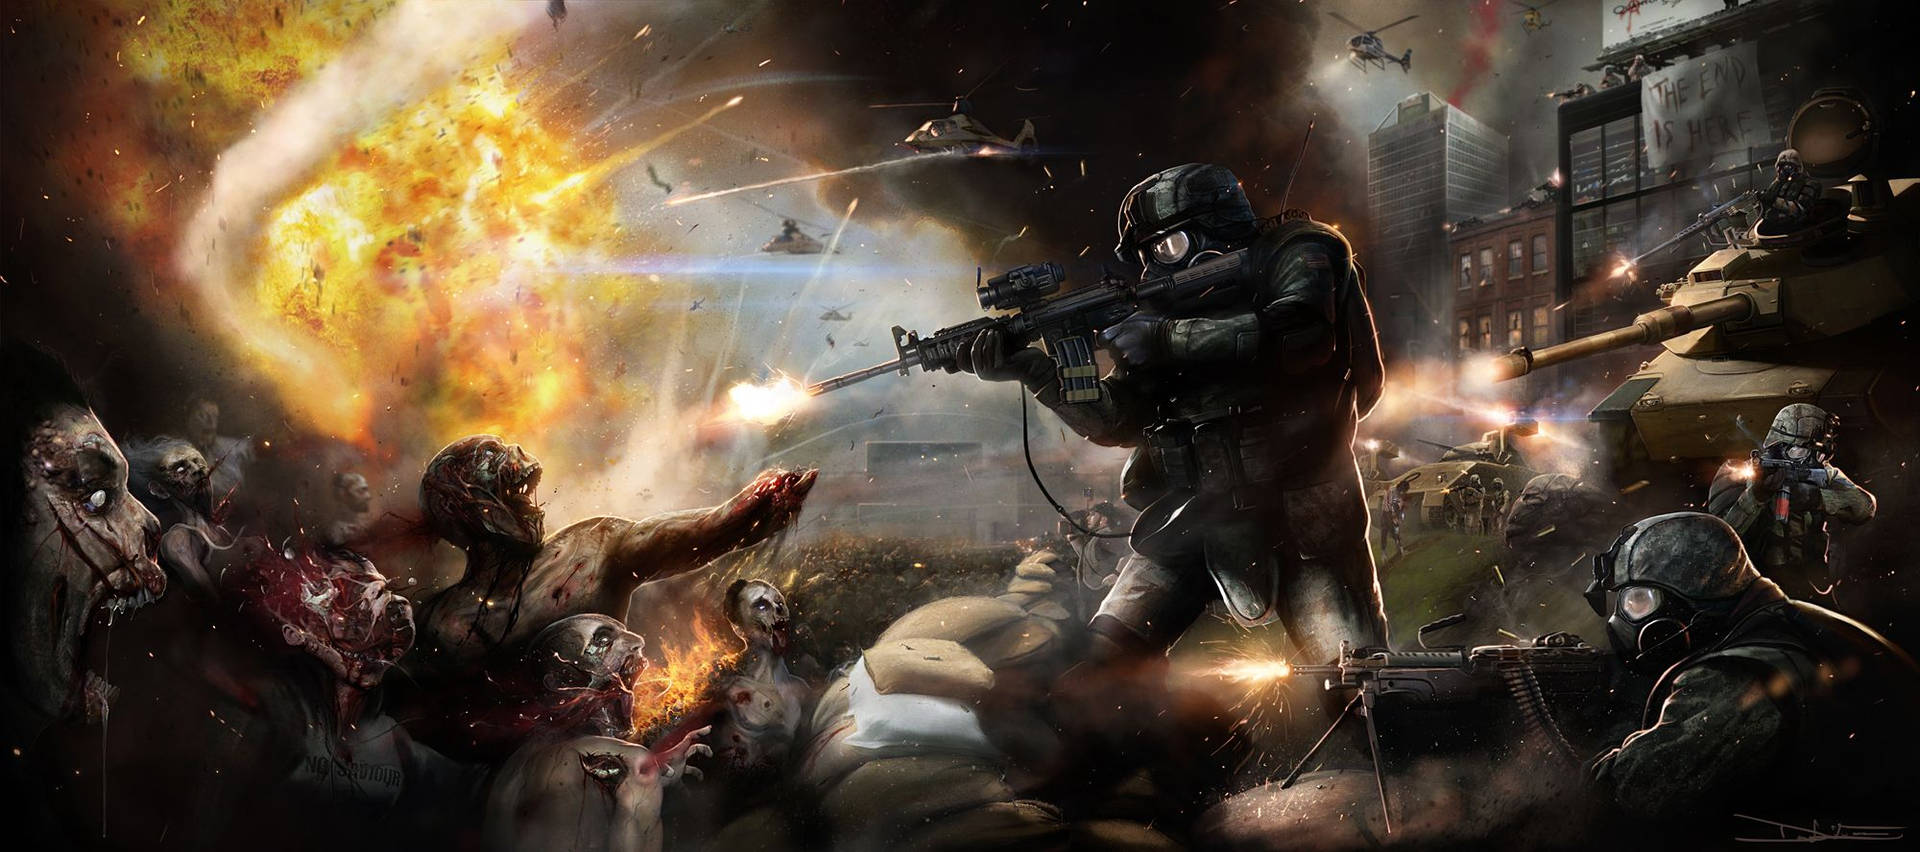 Awesome Military In Action Wallpaper